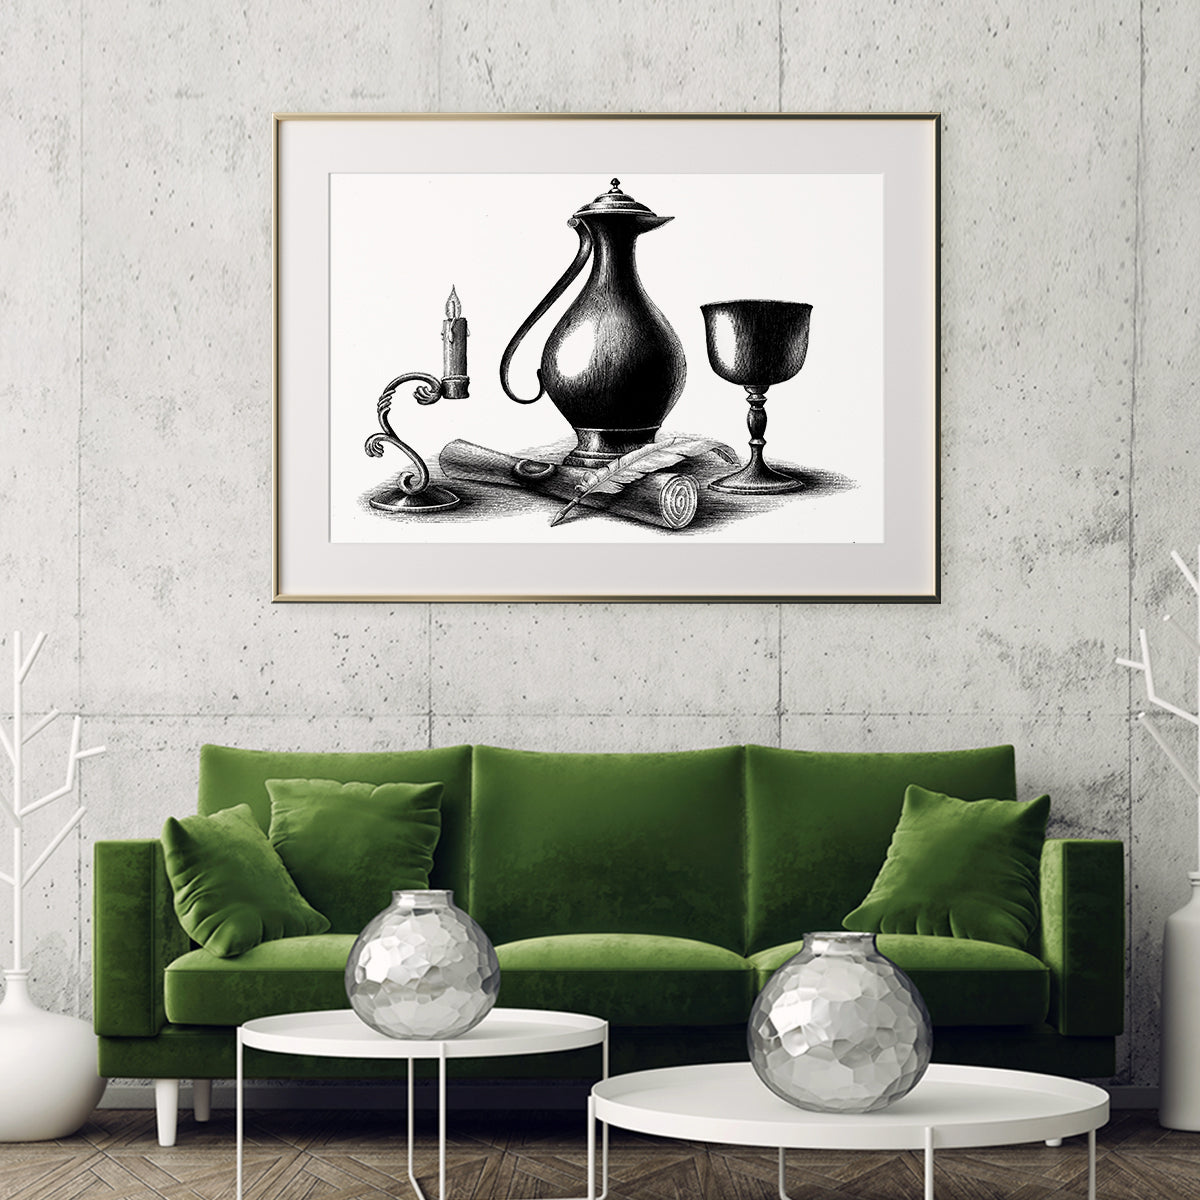 Antique Pitcher Vintage Posters Decoration for Interior-Horizontal Posters NOT FRAMED-CetArt-10″x8″ inches-CetArt